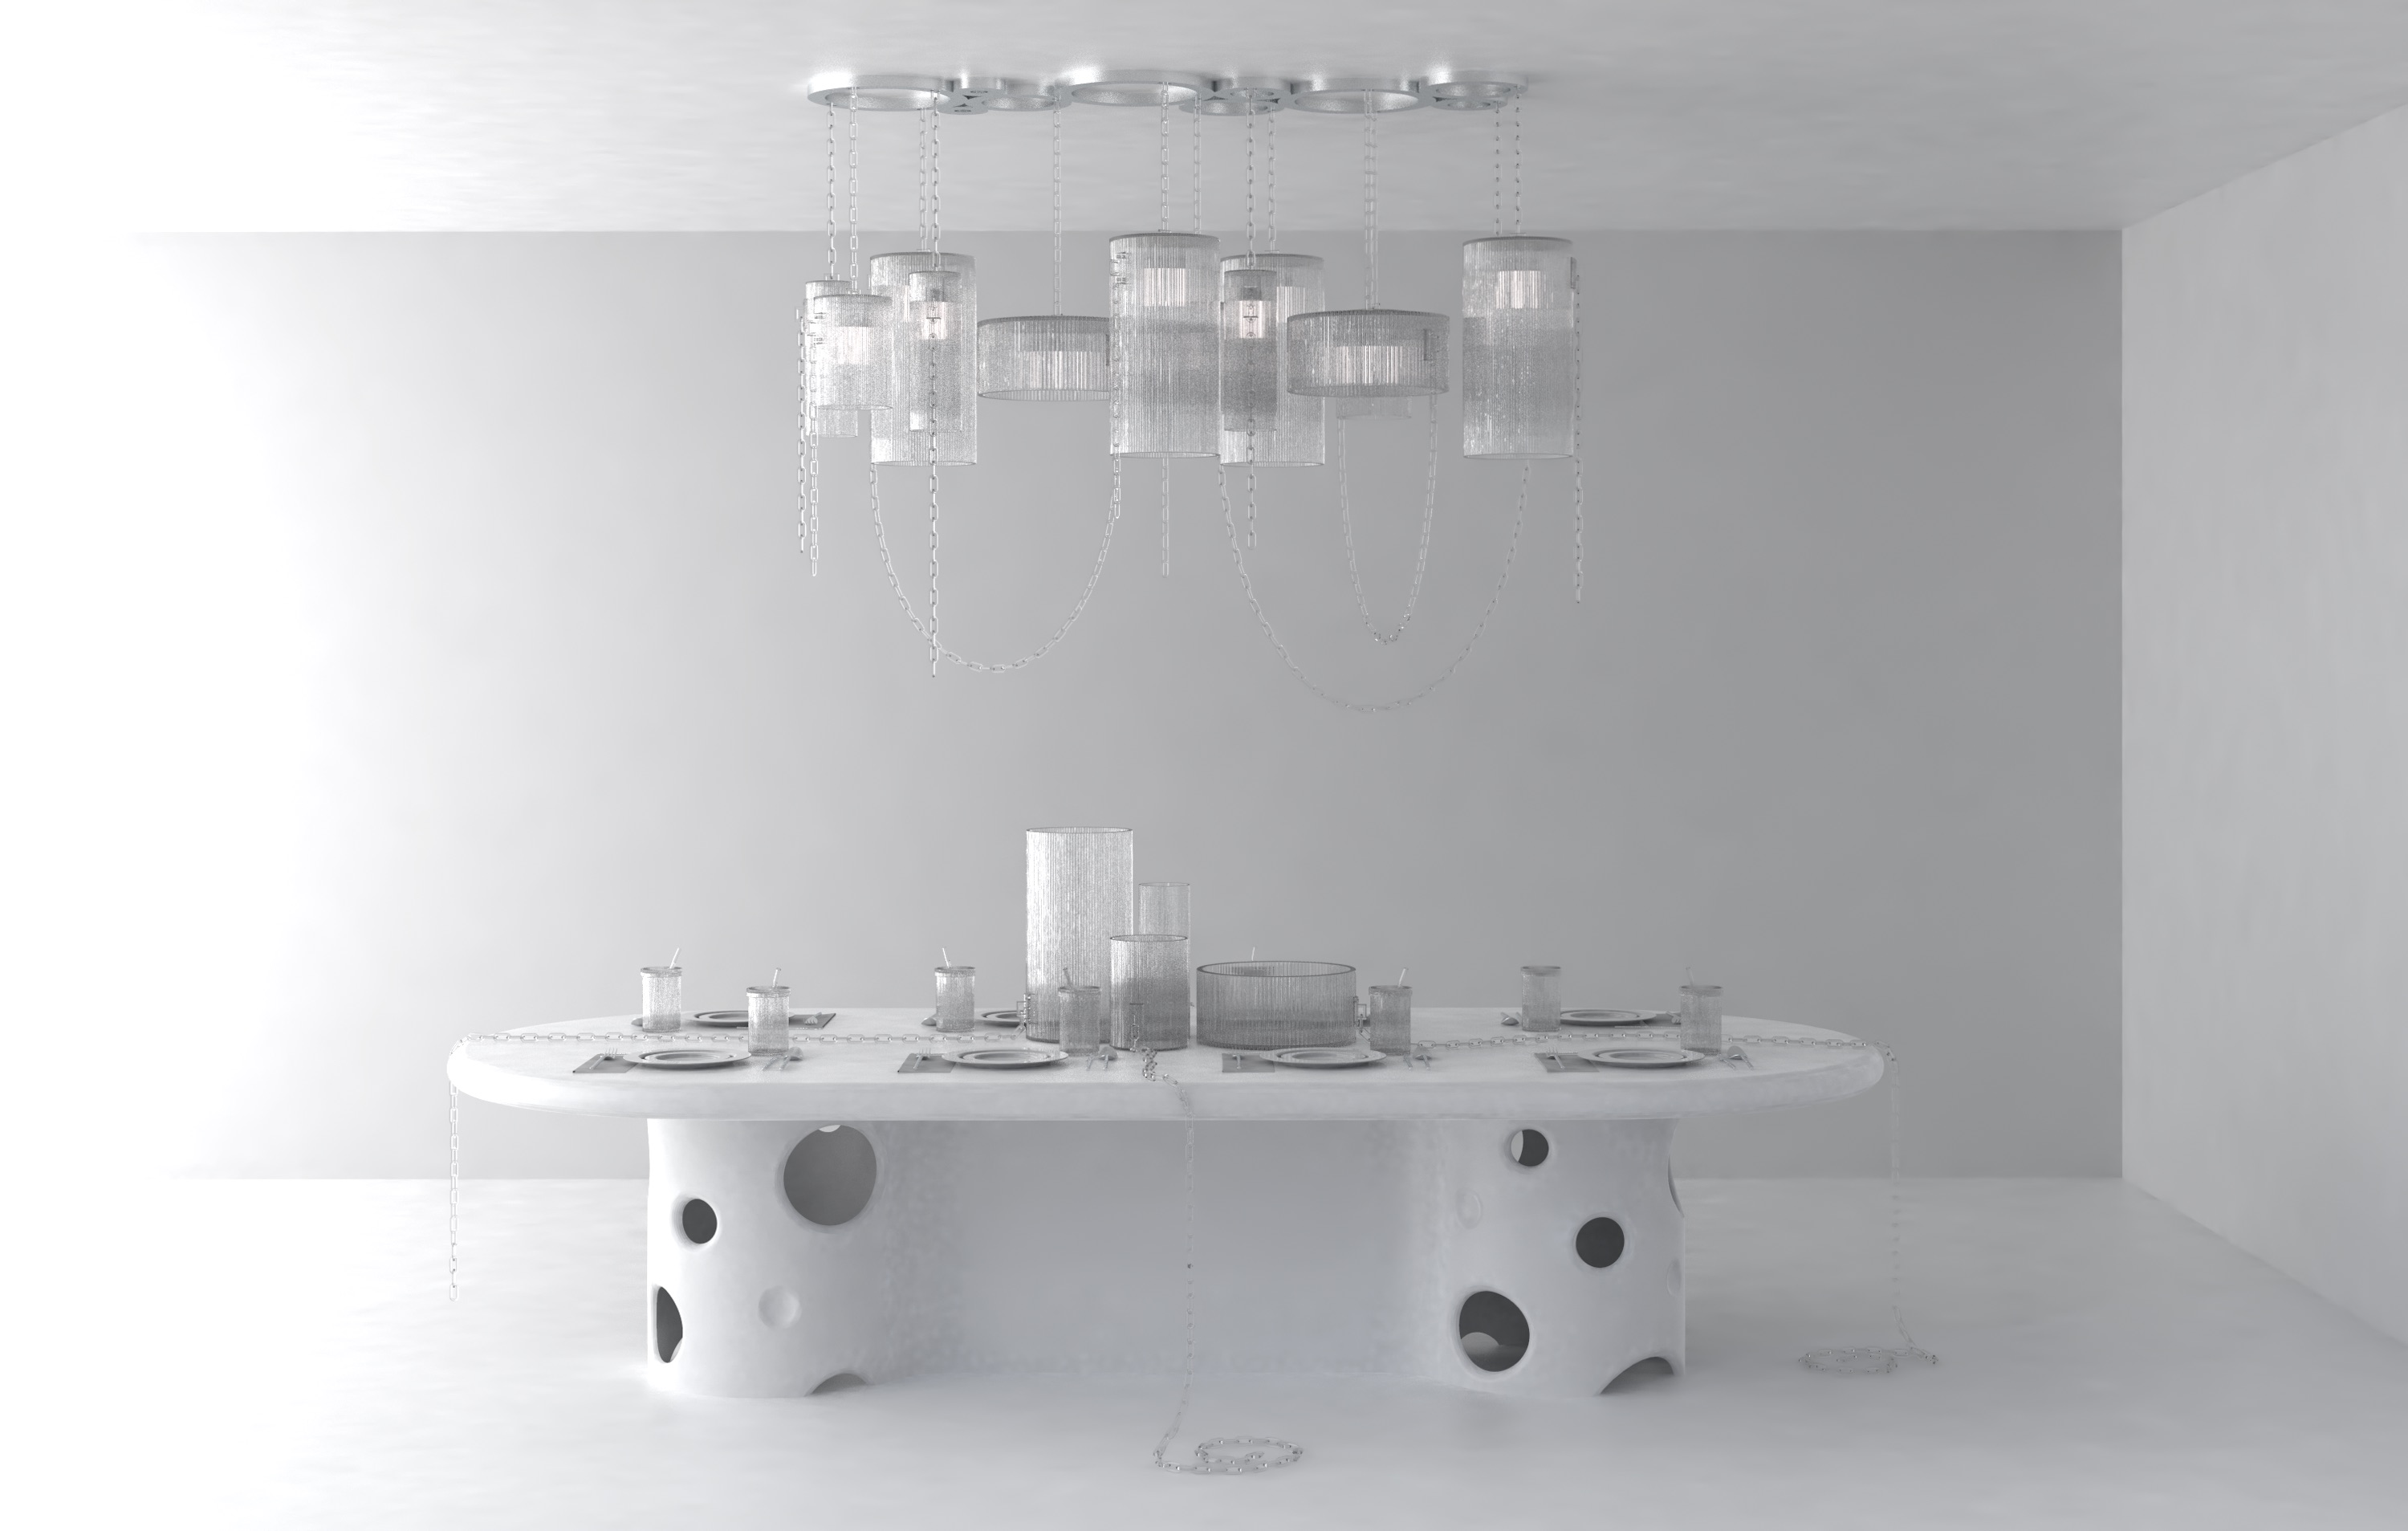 Baccarat Exhibits Collection During Miami Art Basel